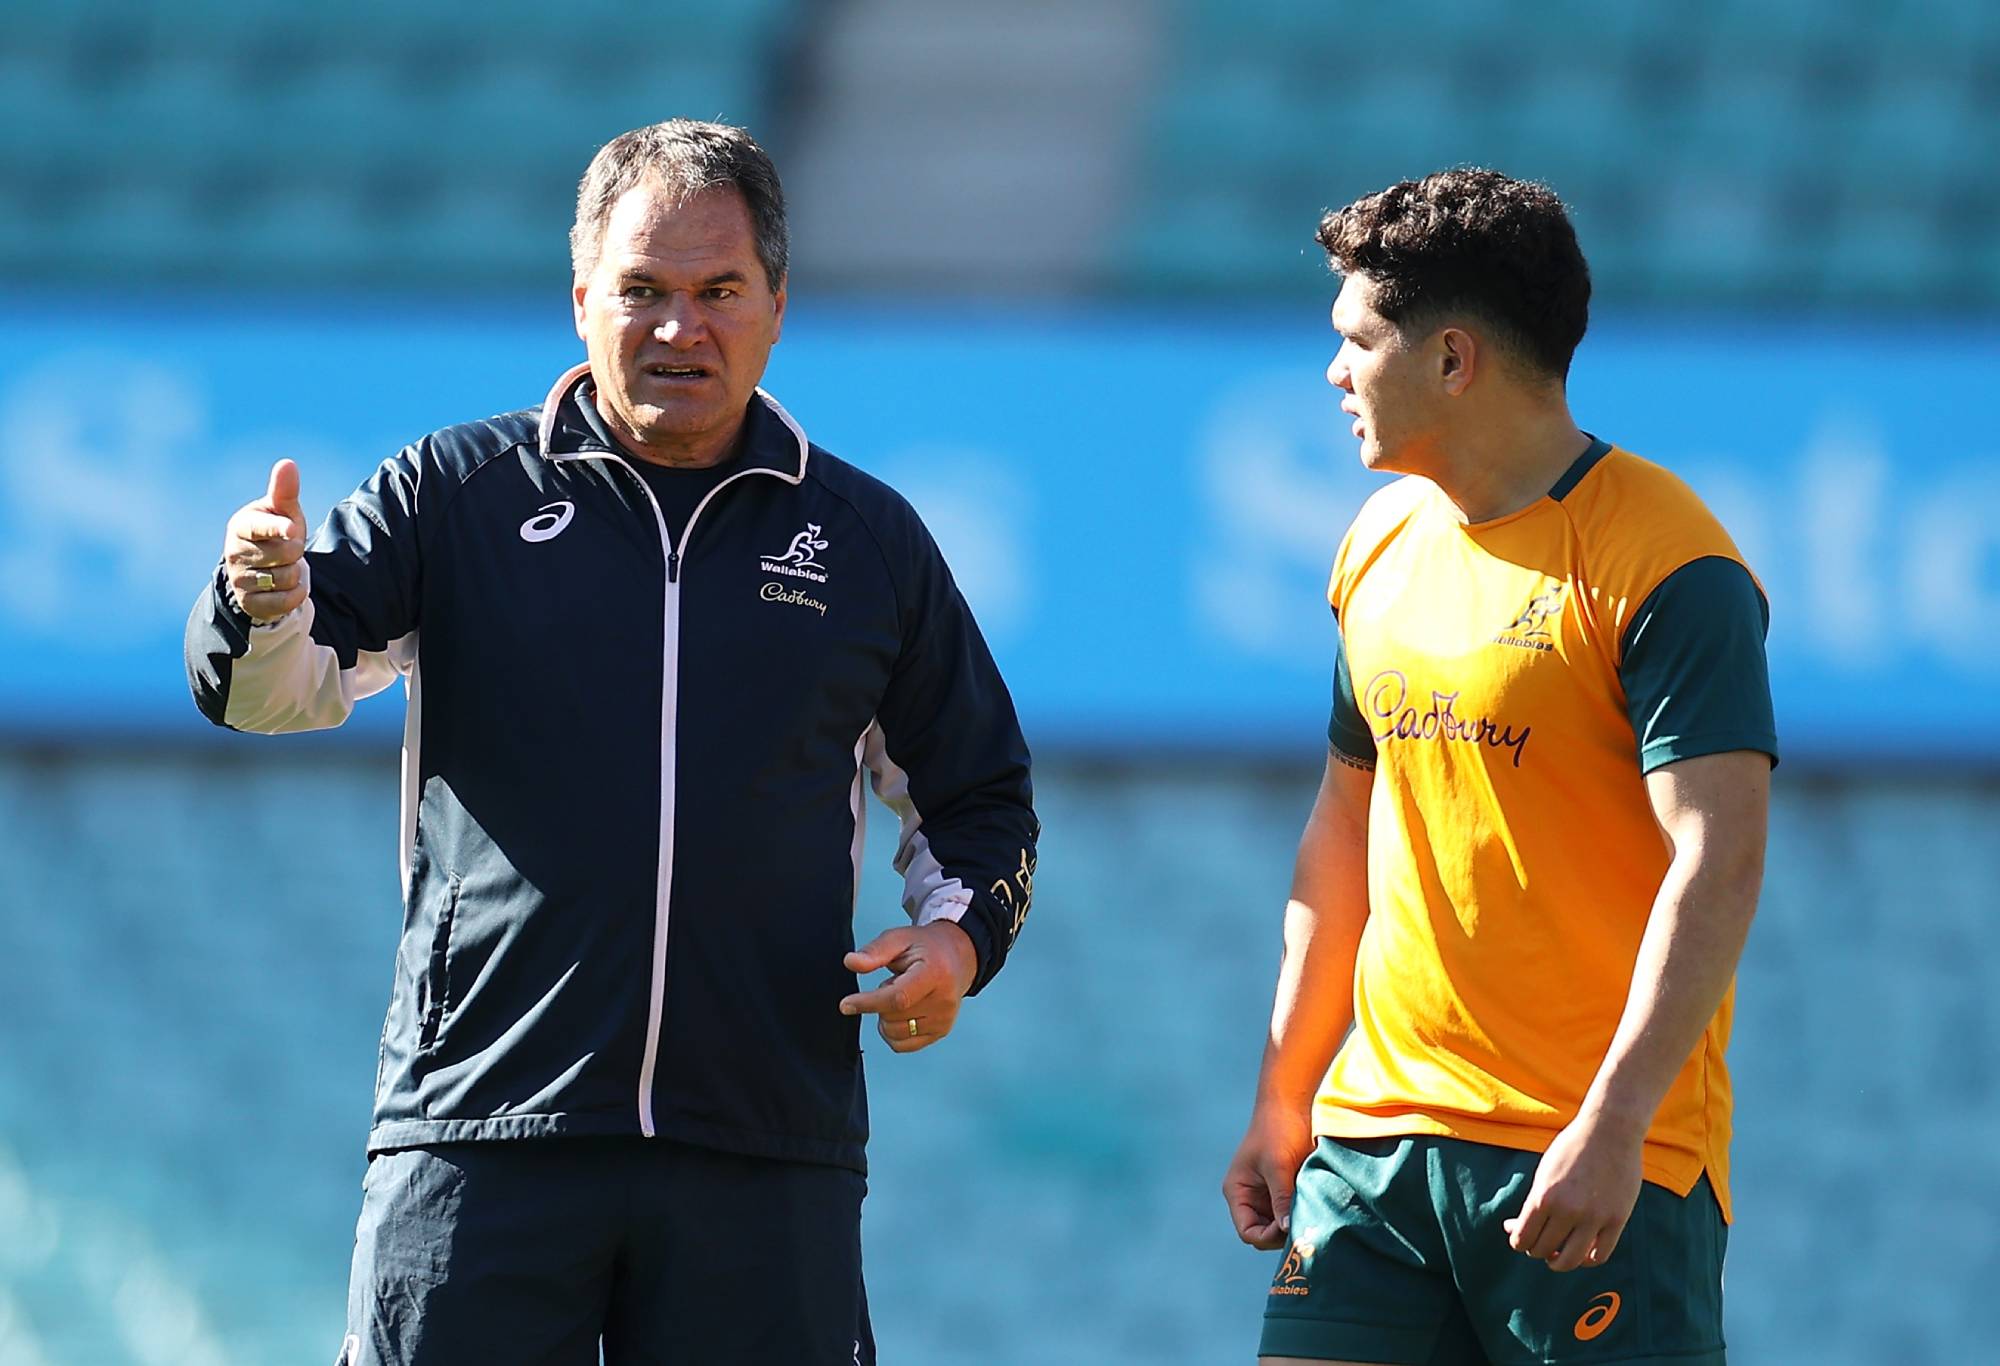 Wallabies coach Dave Rennie speaks to Noah Lolesio during the Australia Wallabies Captain's Run at Sydney Cricket Ground on July 15, 2022 in Sydney, Australia. (Photo by Mark Kolbe/Getty Images)